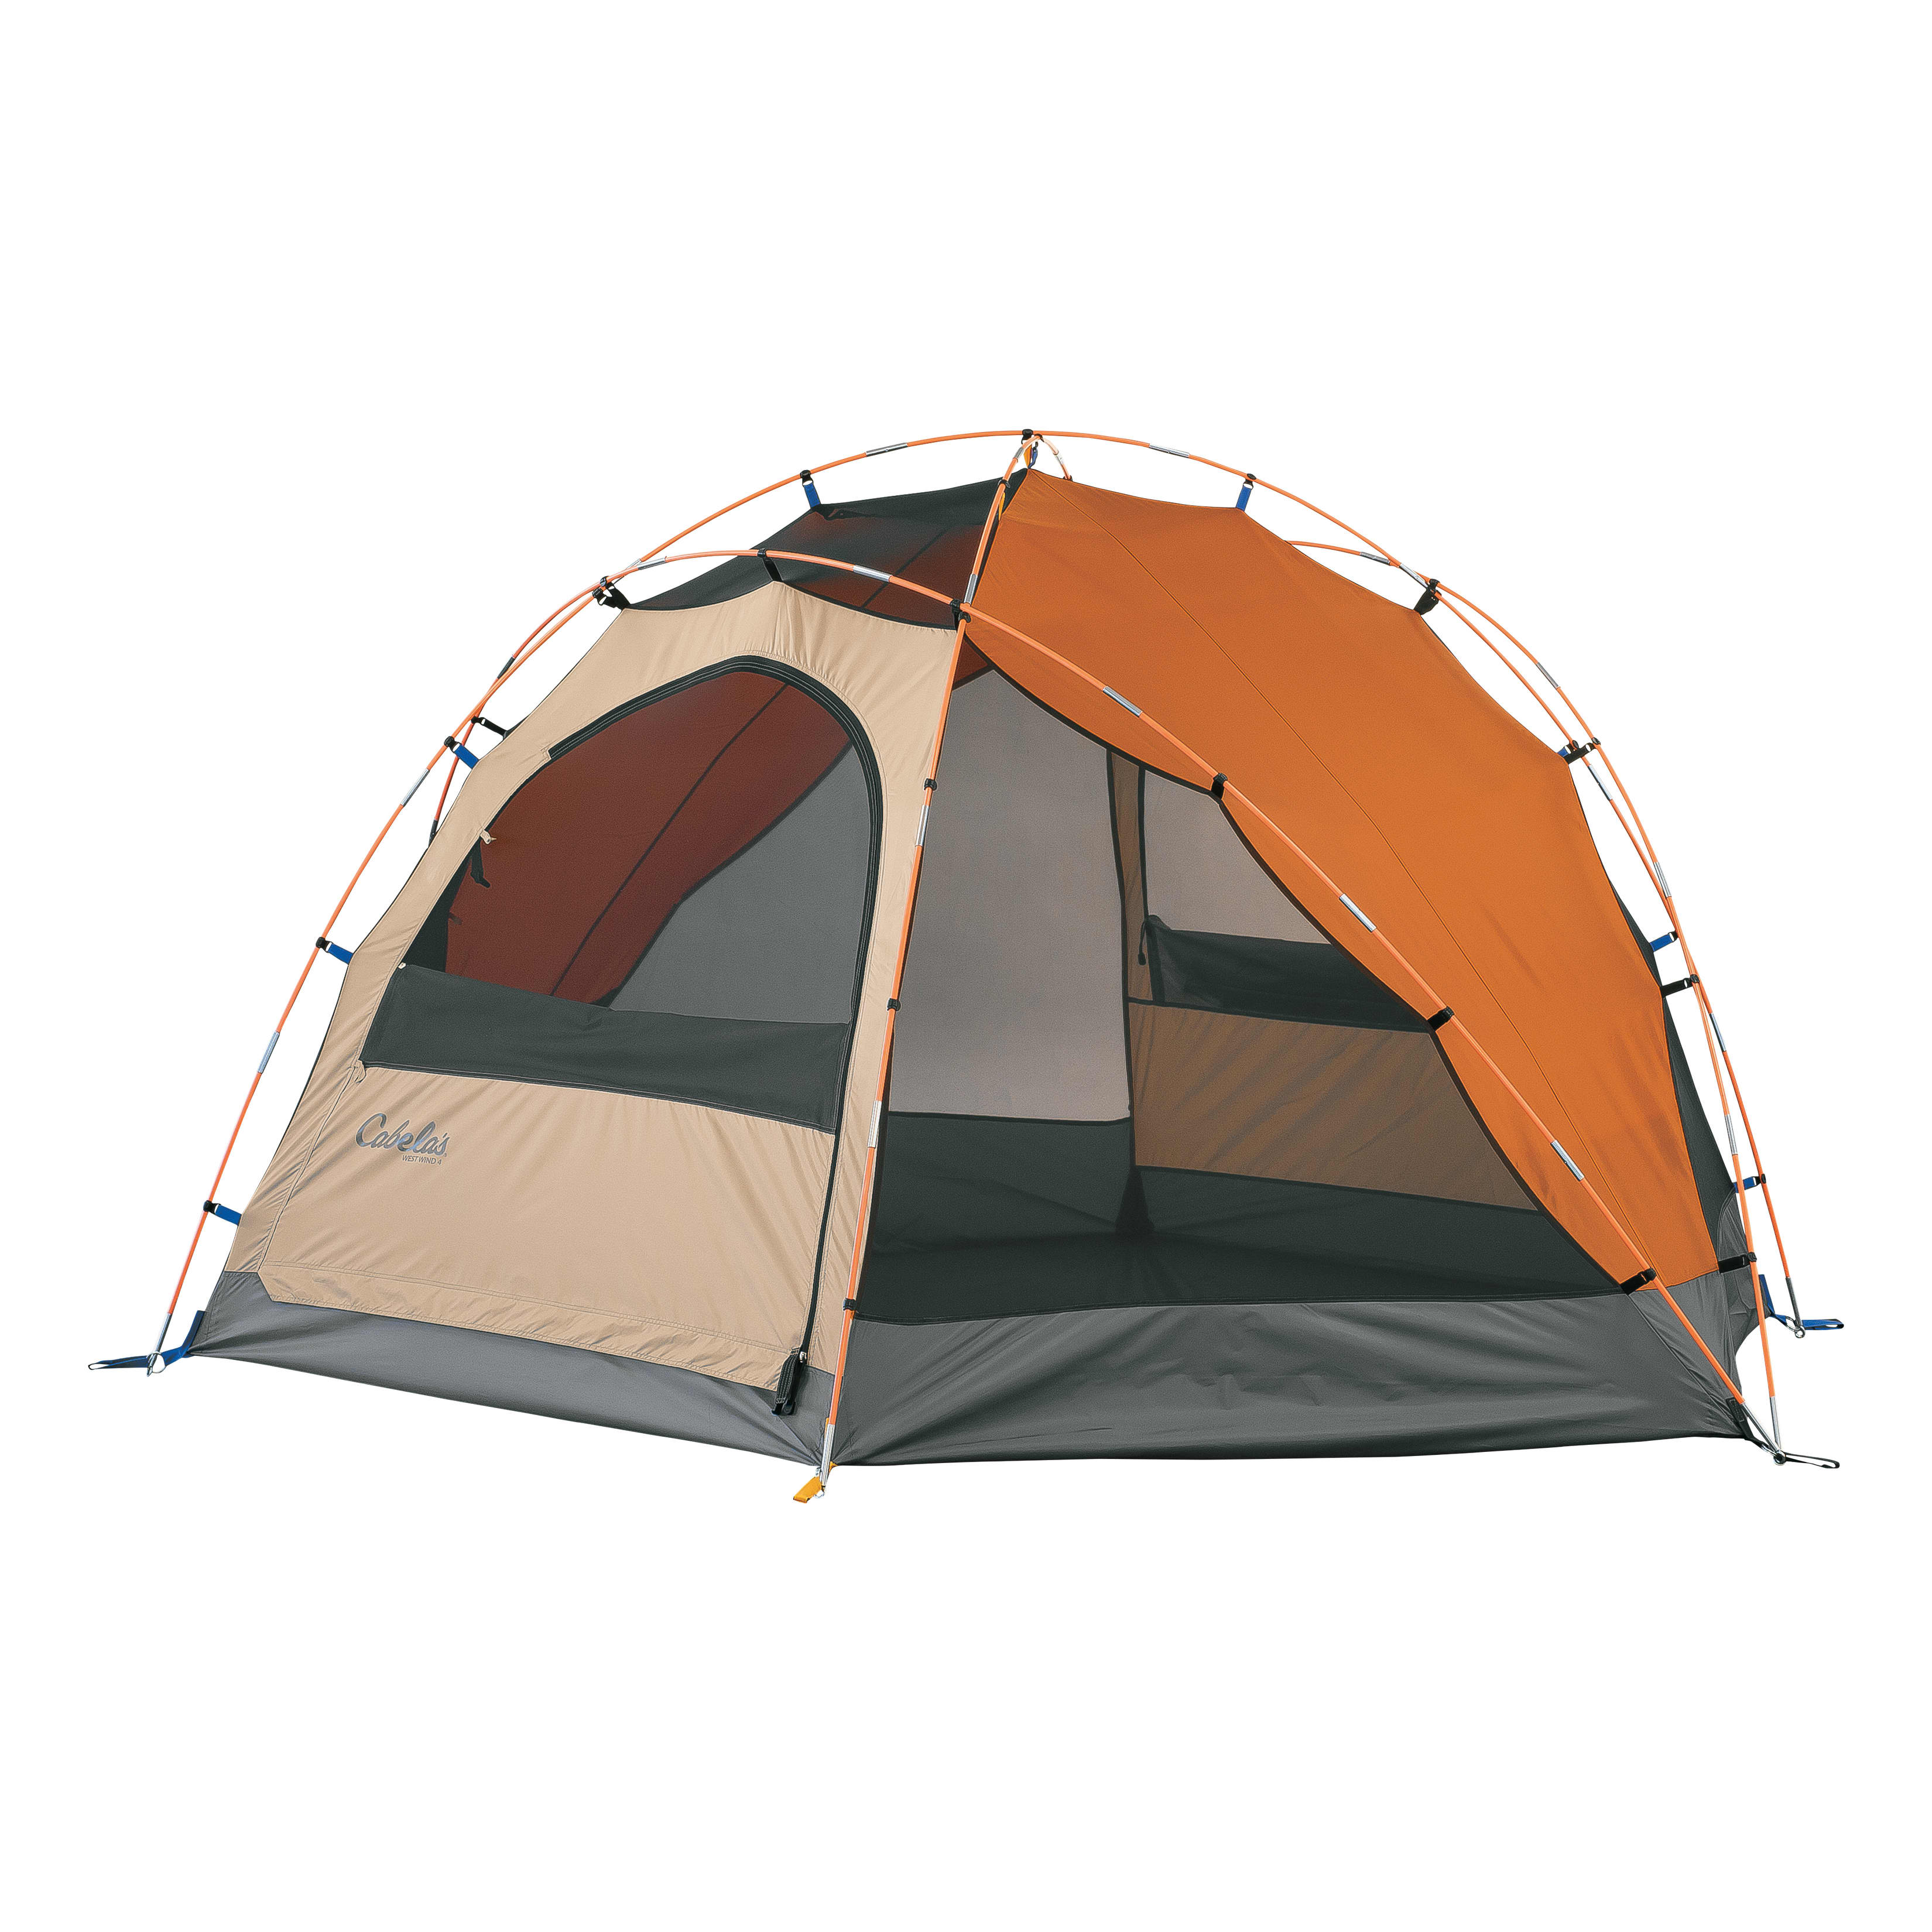 Cabela’s West Wind™ Dome Tent - Without fly - Windows open - Orange,Cabela’s West Wind™ Dome Tent - Without fly - Windows open - Orange